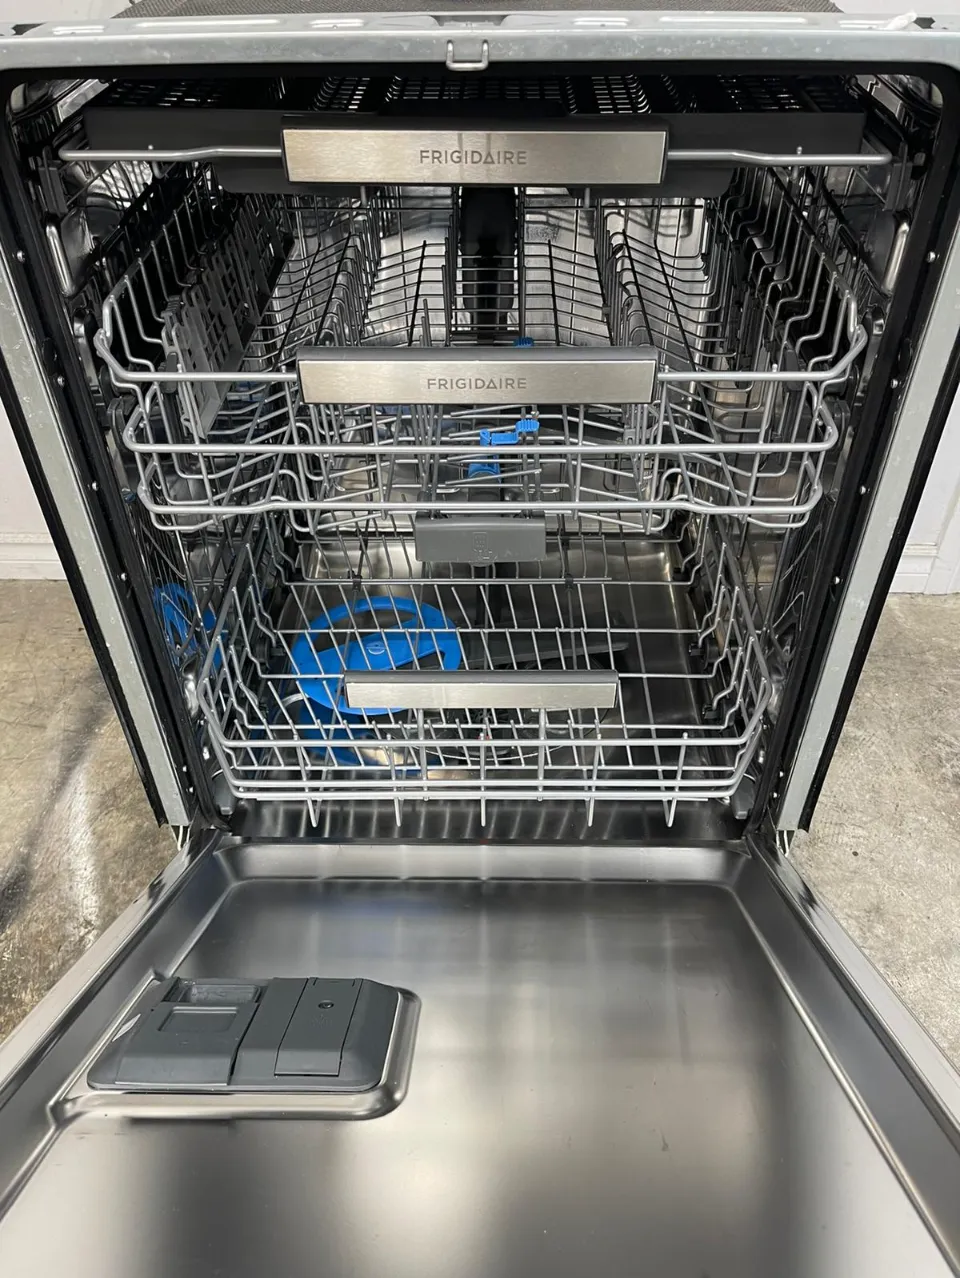 How Long Does A Frigidaire Dishwasher Last Prolong its lifespan